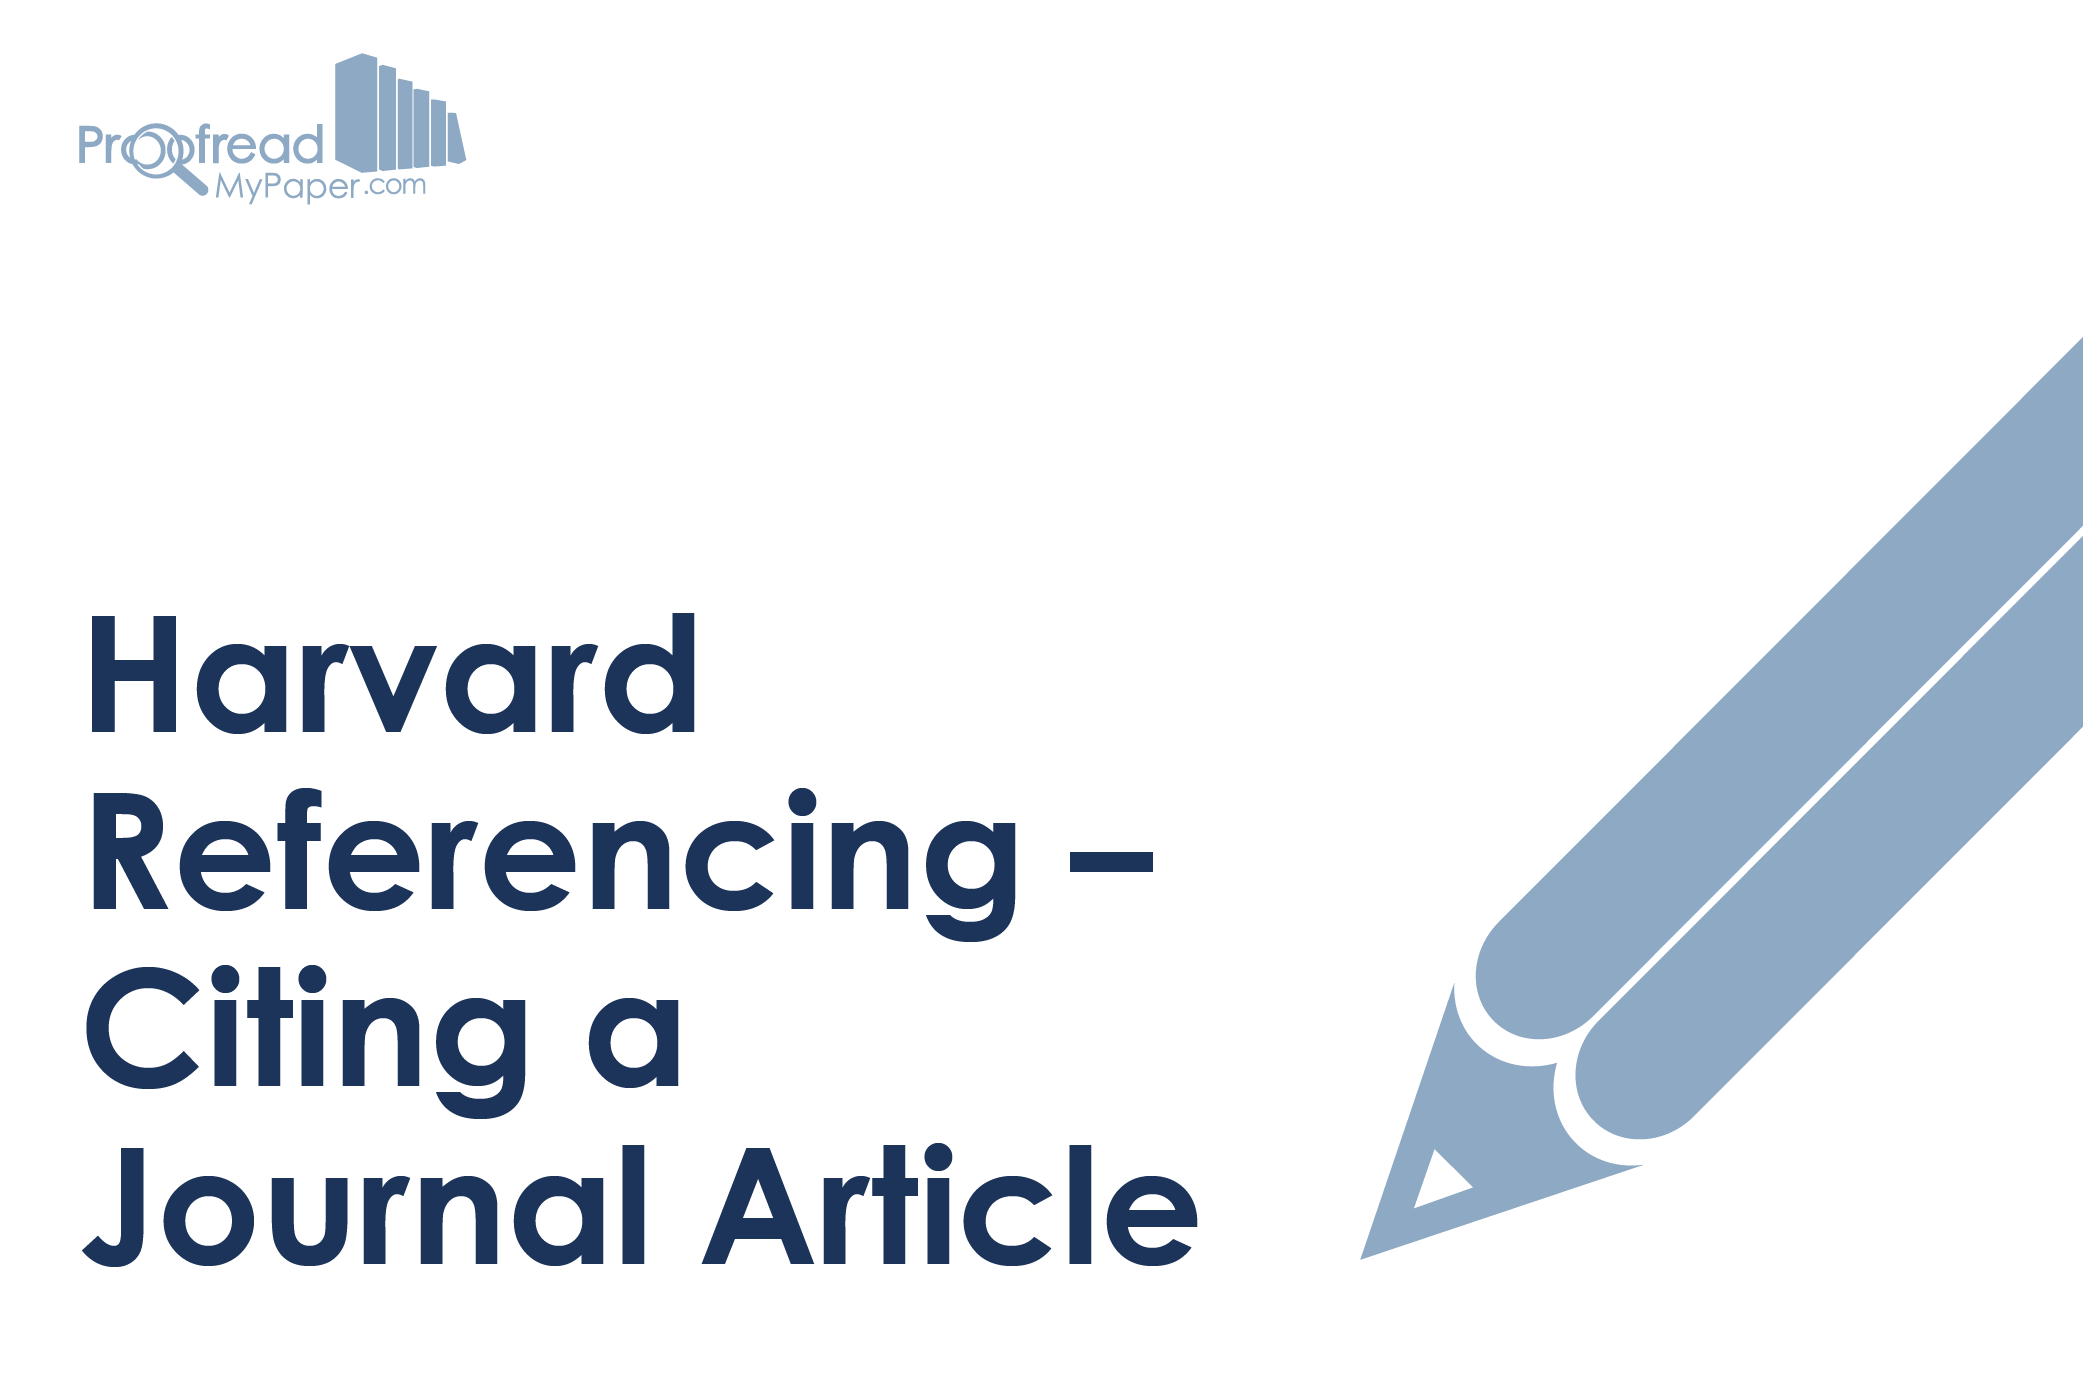 Harvard Referencing – Citing a Journal Article